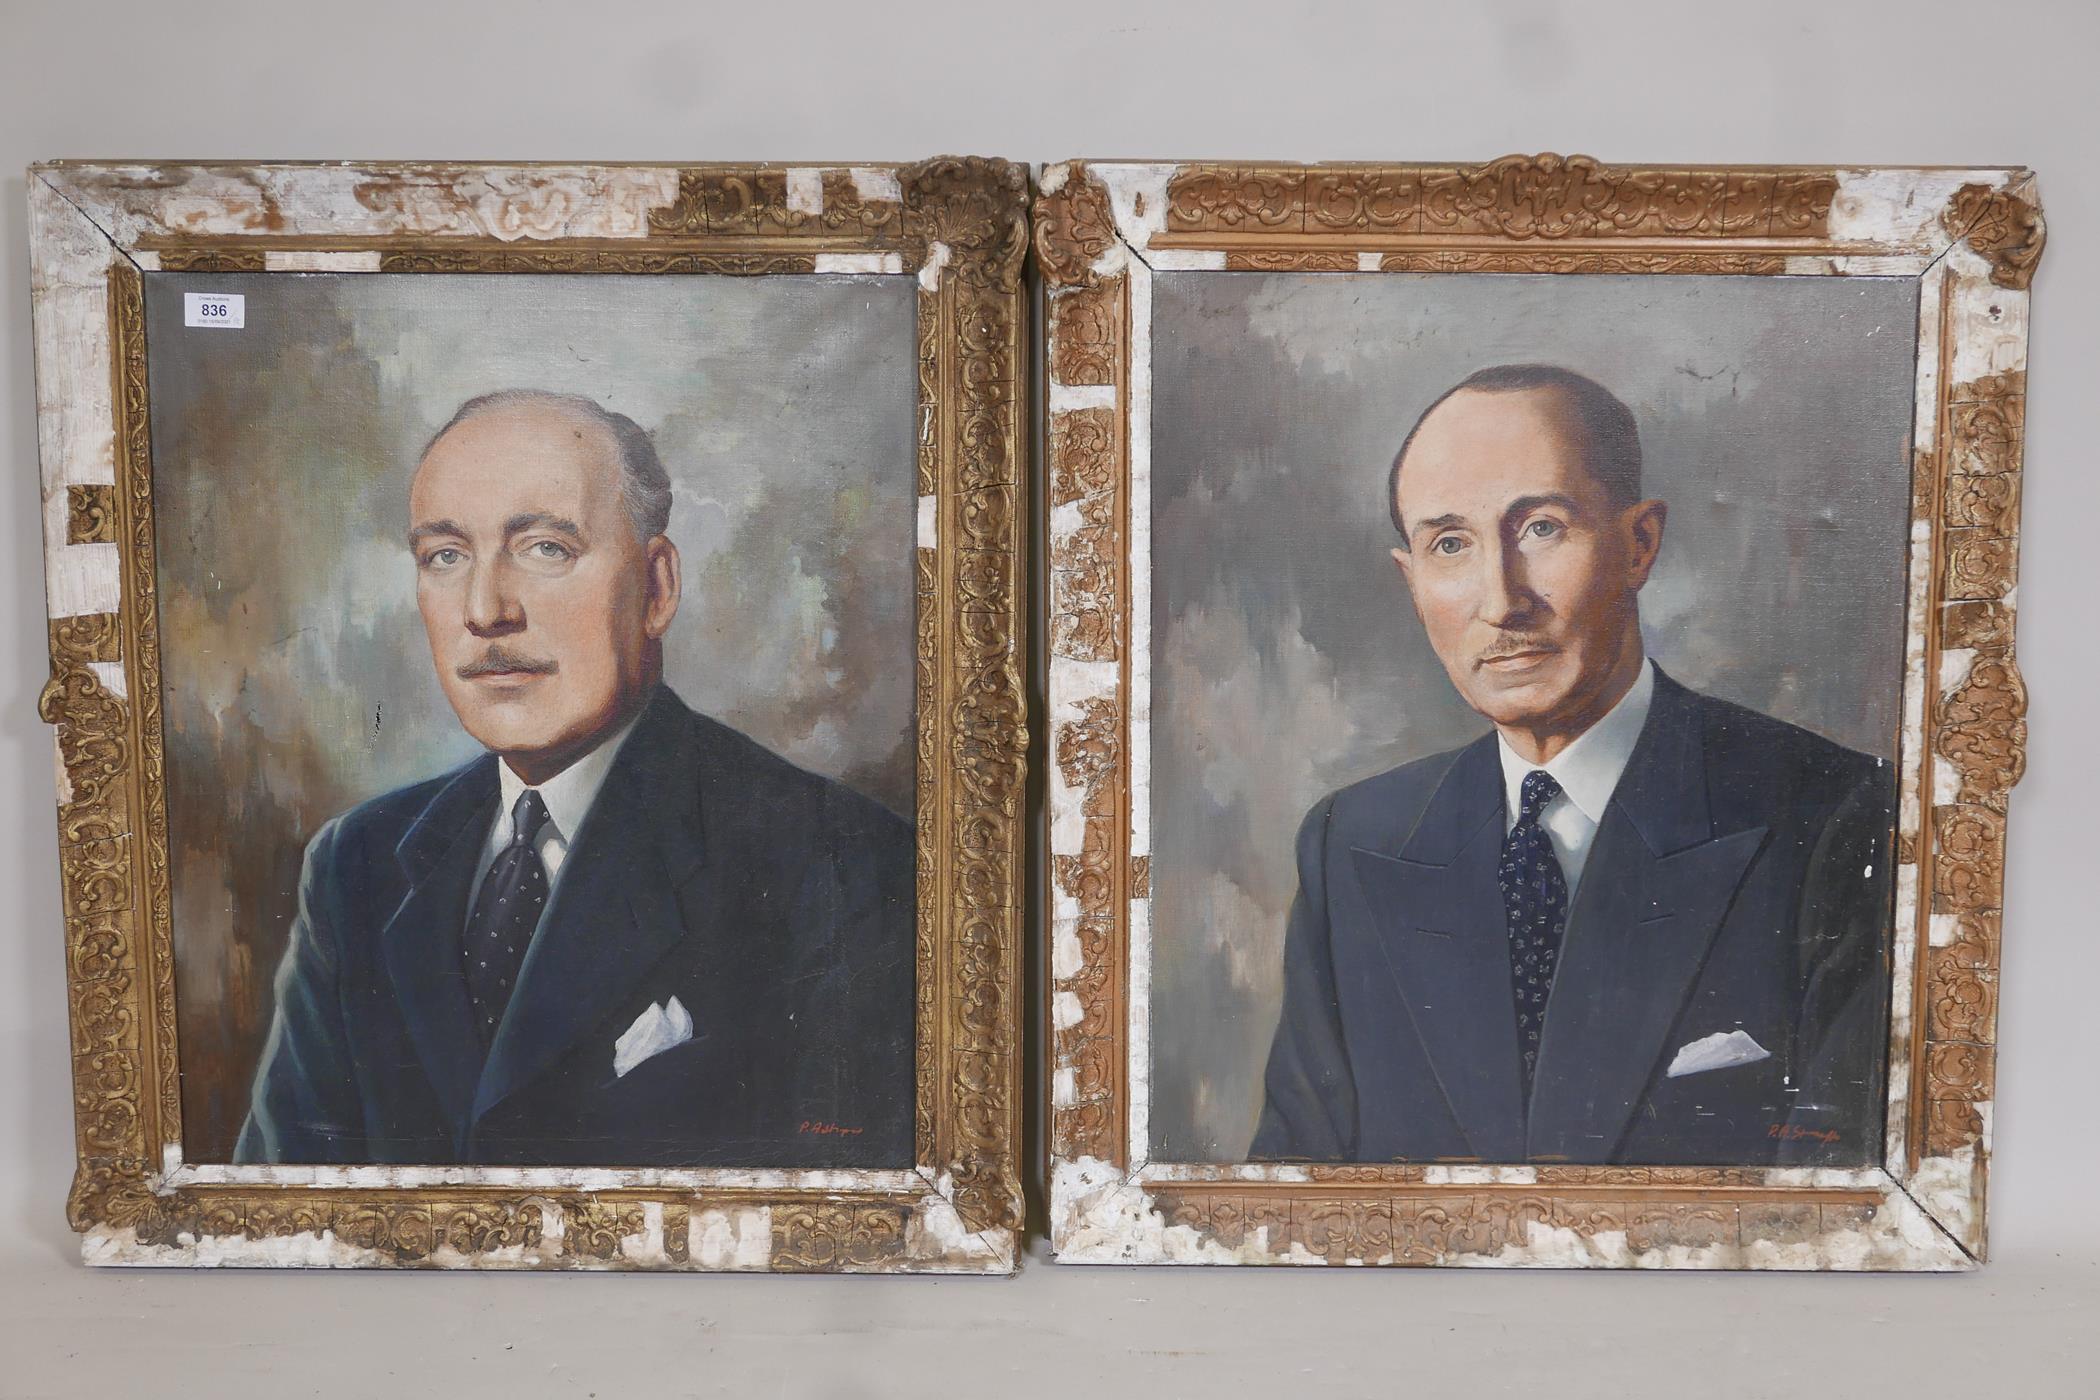 A pair of portraits of gentlemen, signed indistinctly P.A. St...?, oils on canvas, 20" x 24"